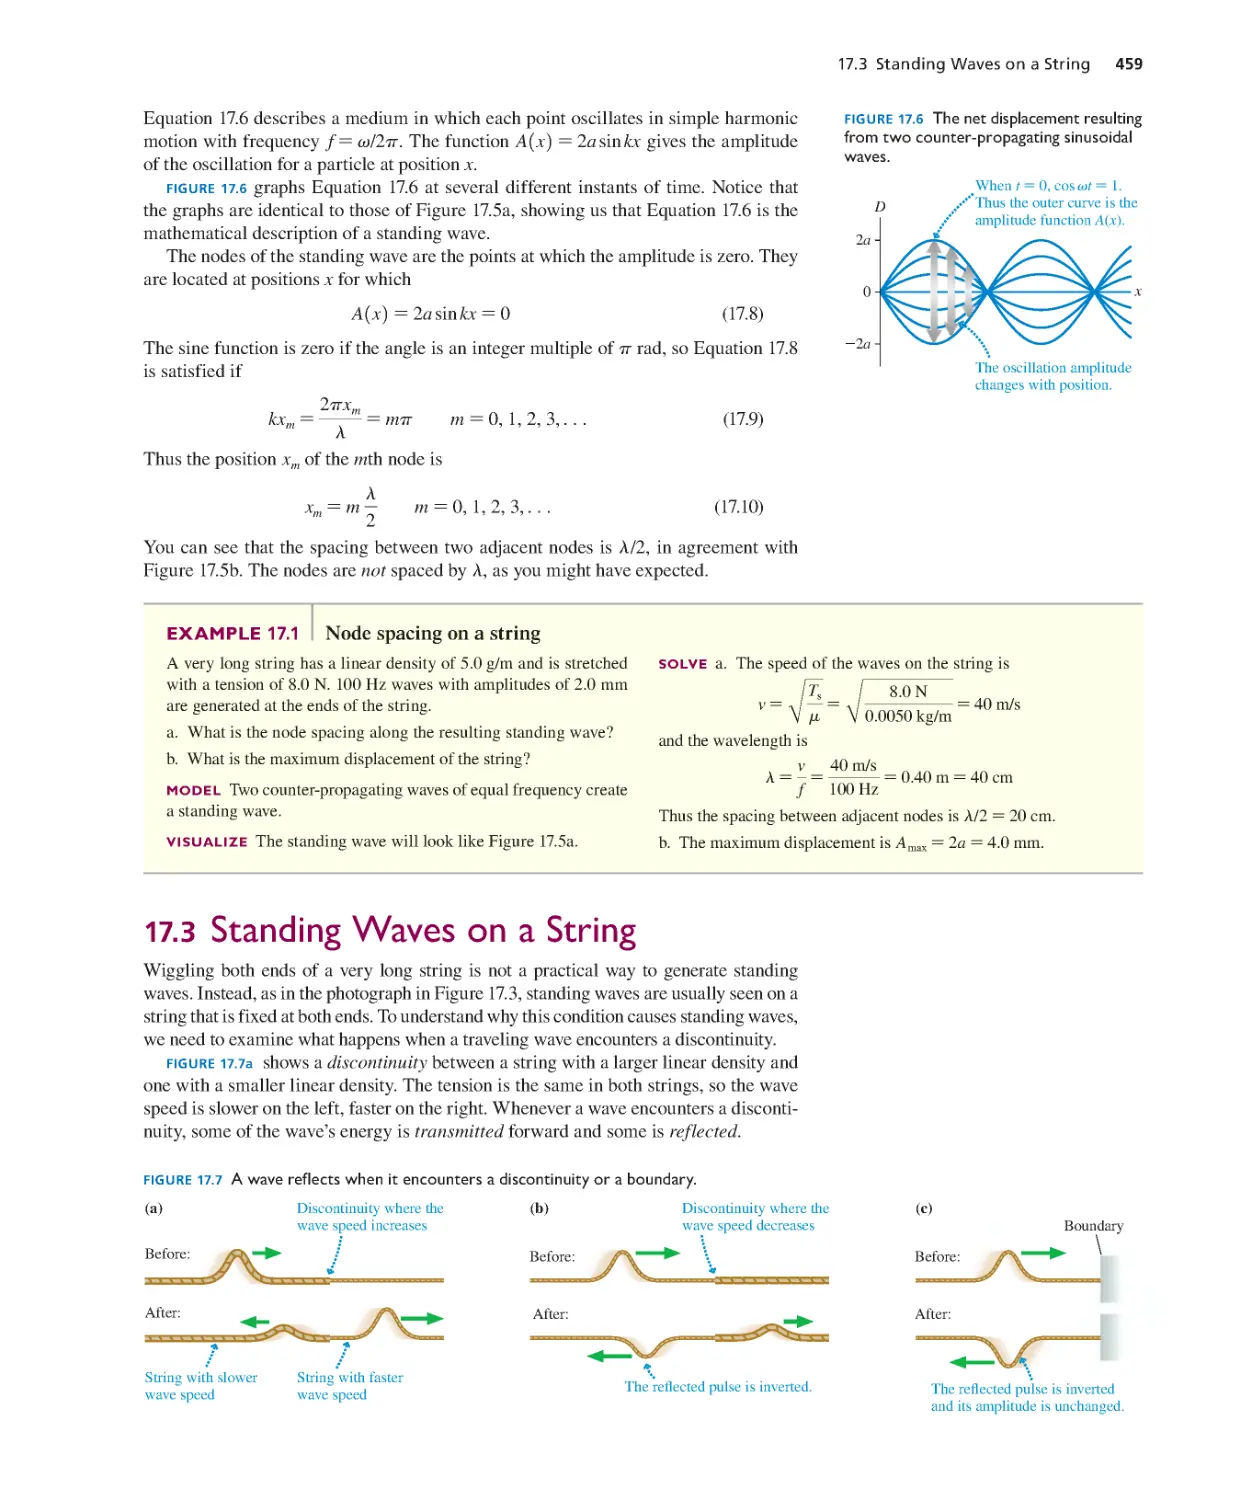 17.3. Standing Waves on a String